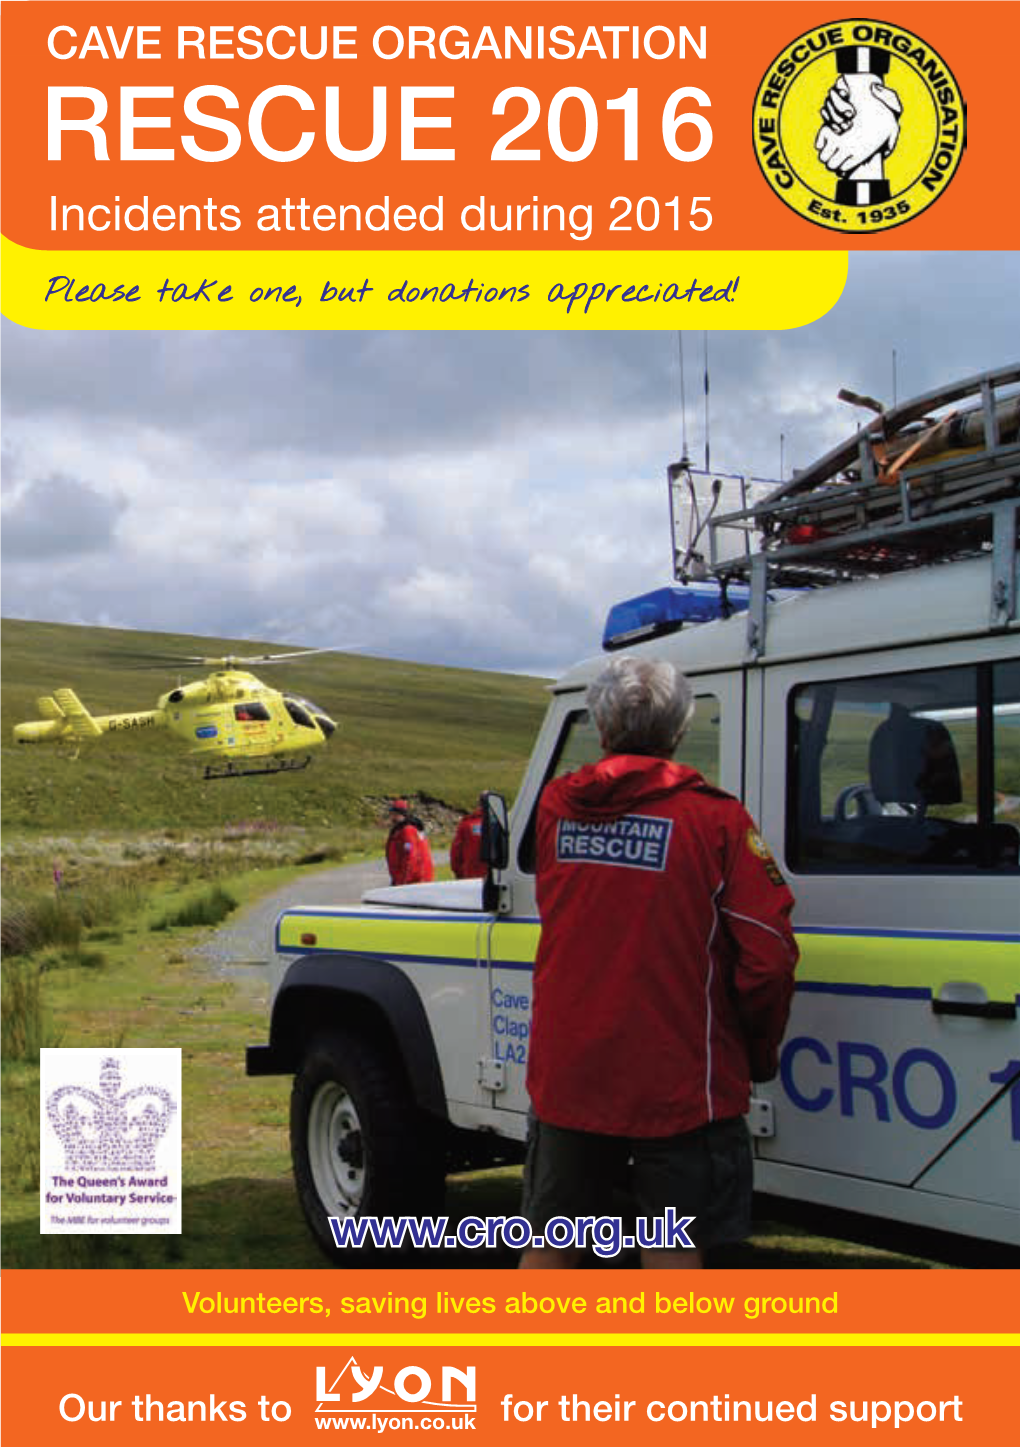 RESCUE 2016 Incidents Attended During 2015